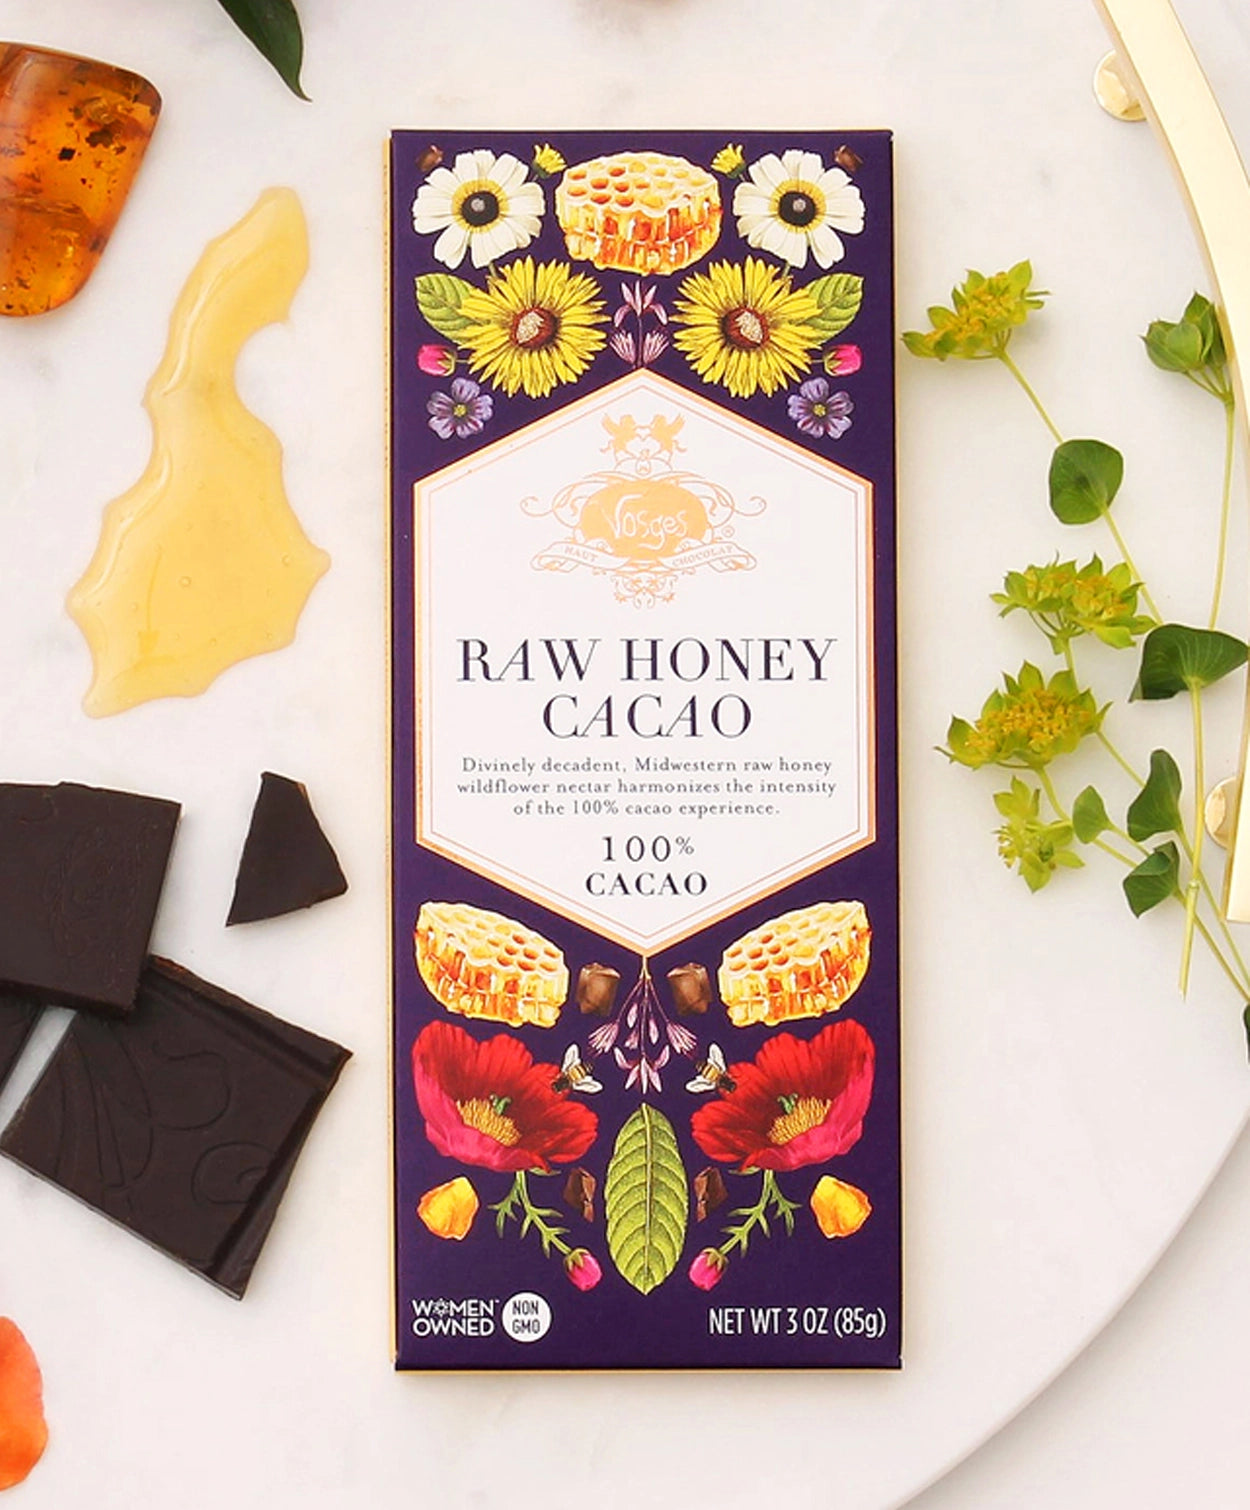 Vosges Raw Honey Cacao bar beside several pieces of chocolate, honey, amber and fresh flowers on a white serving platter.